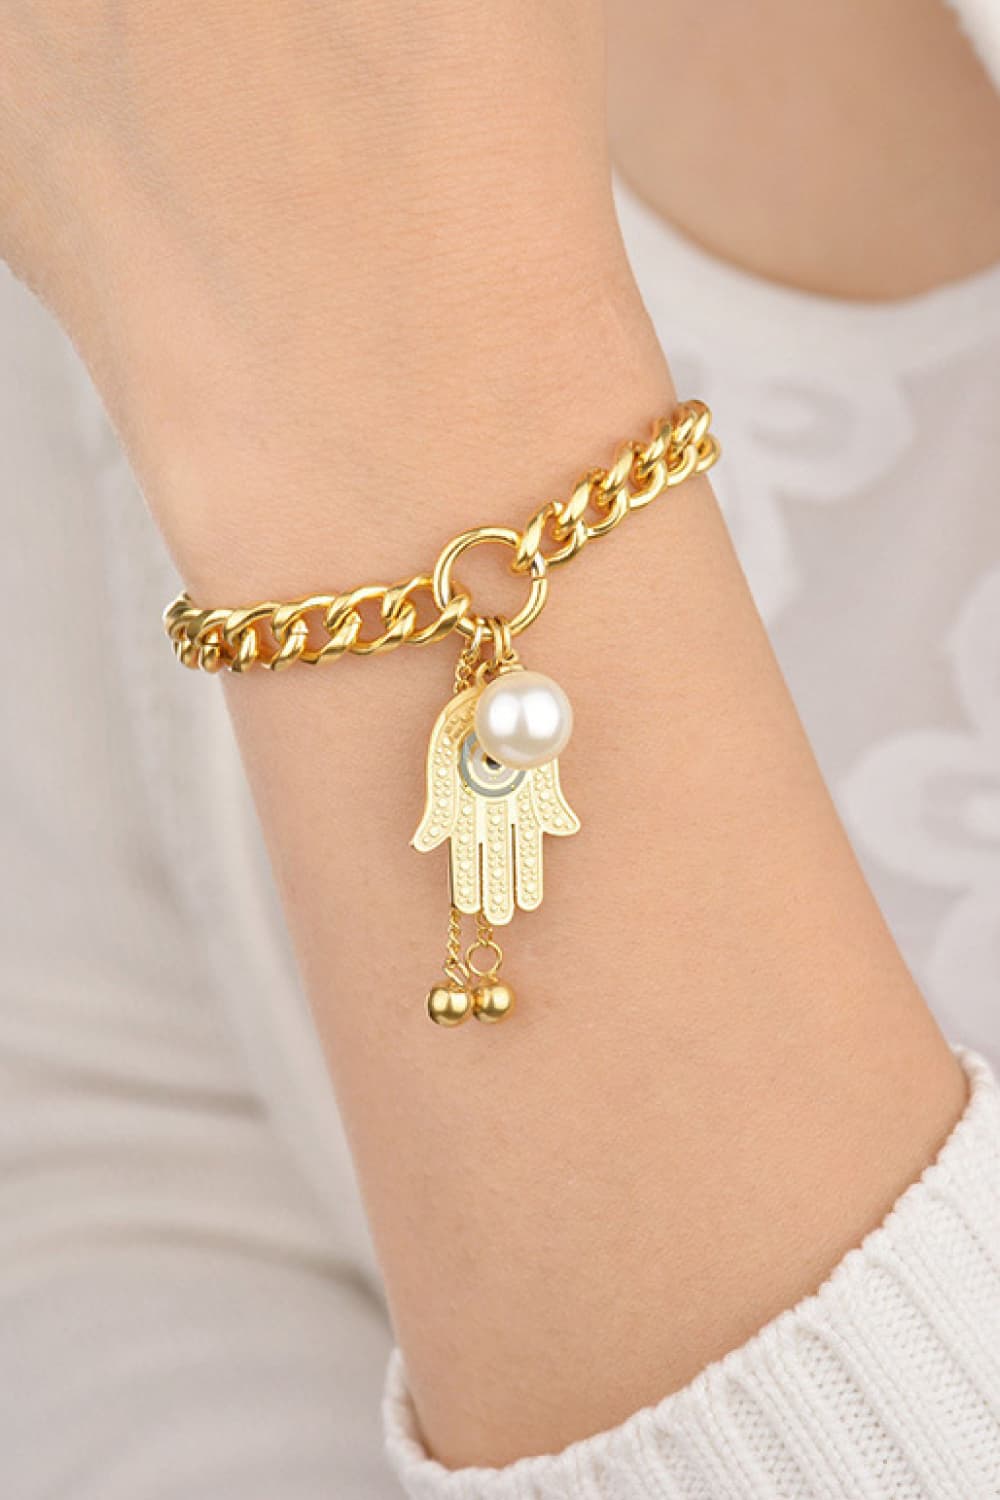 Hamsa Hand Chunky Chain Bracelet - Tophatter Deals and Online Shopping - Electronics, Jewelry, Beauty, Health, Gadgets, Fashion - Tophatter's Discounts & Offers - tophatters - tophatters.co